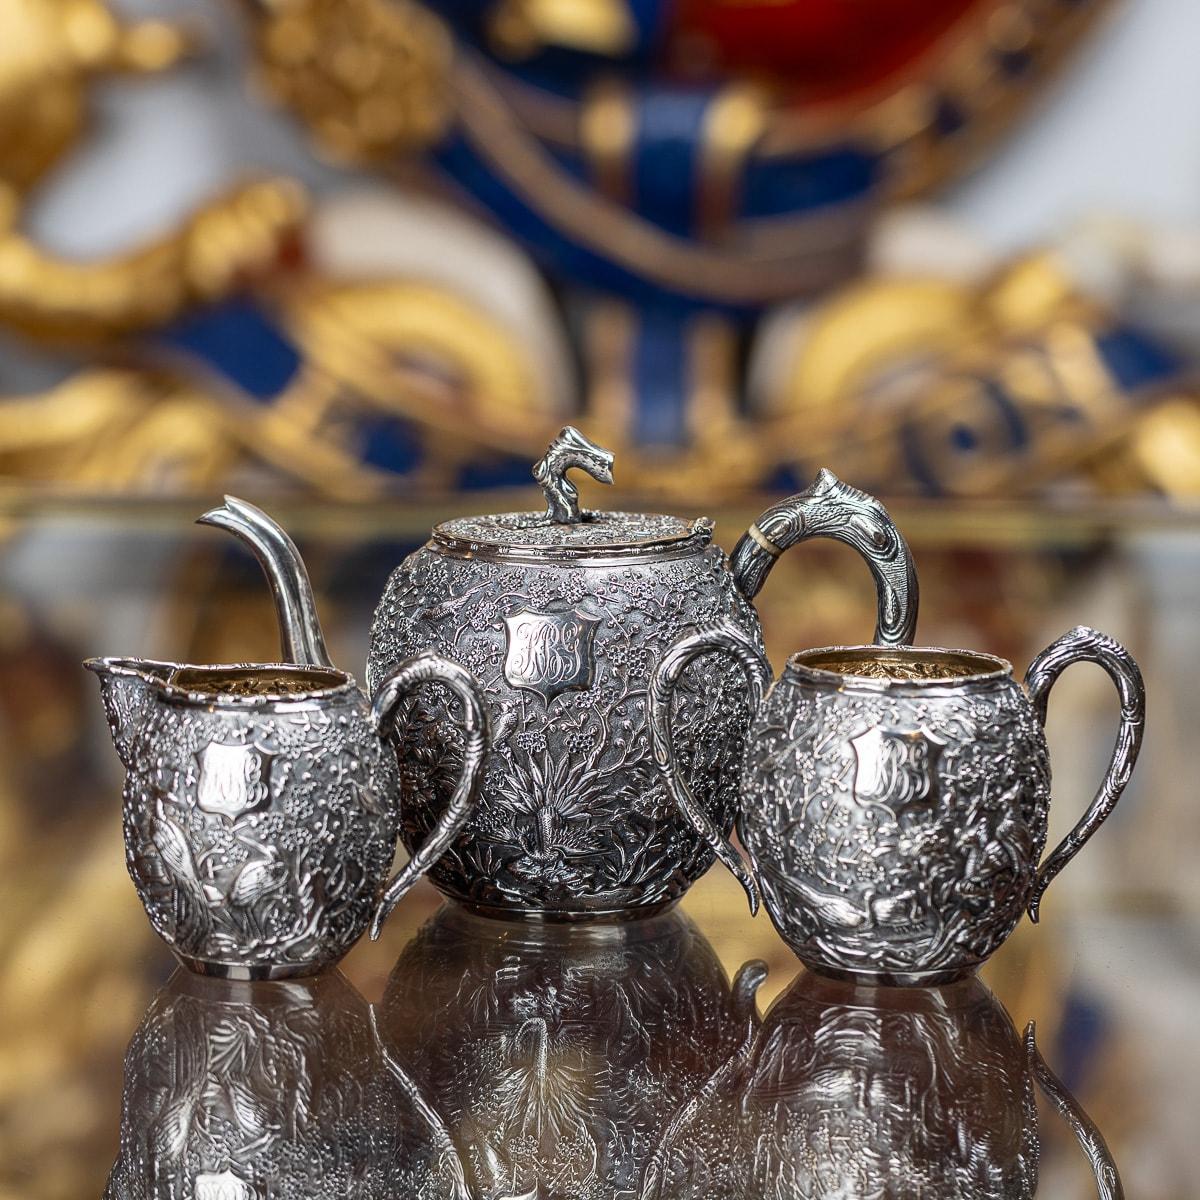 Antique late 19th Century Chinese export solid silver exquisite three piece tea set, comprising of a teapot, sugar bowl and milk jug, each spherical body applied with blooming cherry blossom and pirching birds in high relief on matted ground, teapot